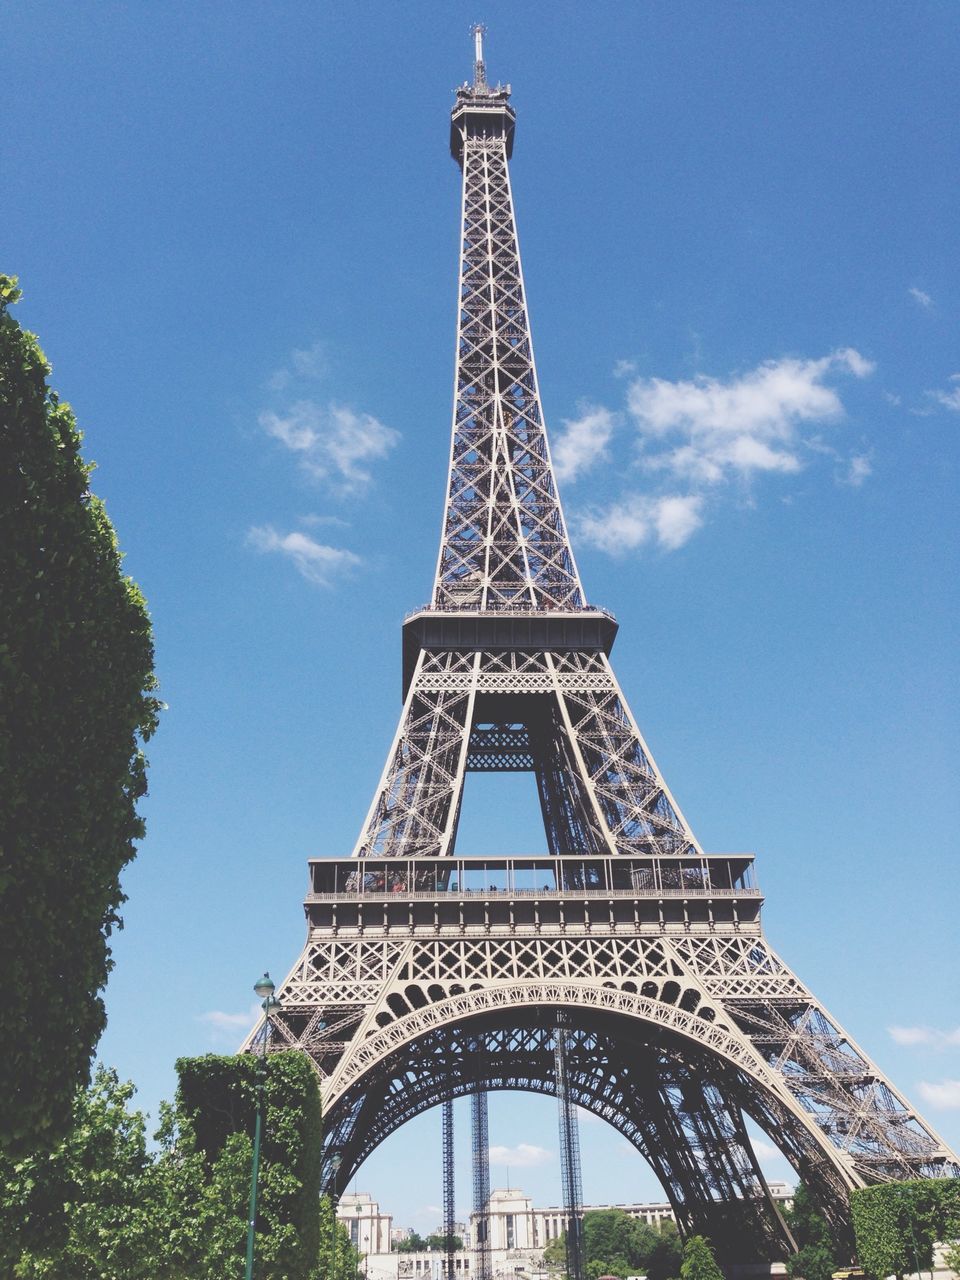 eiffel tower, architecture, built structure, low angle view, tower, famous place, international landmark, metal, culture, travel destinations, tall - high, sky, tourism, capital cities, travel, history, tree, metallic, architectural feature, day